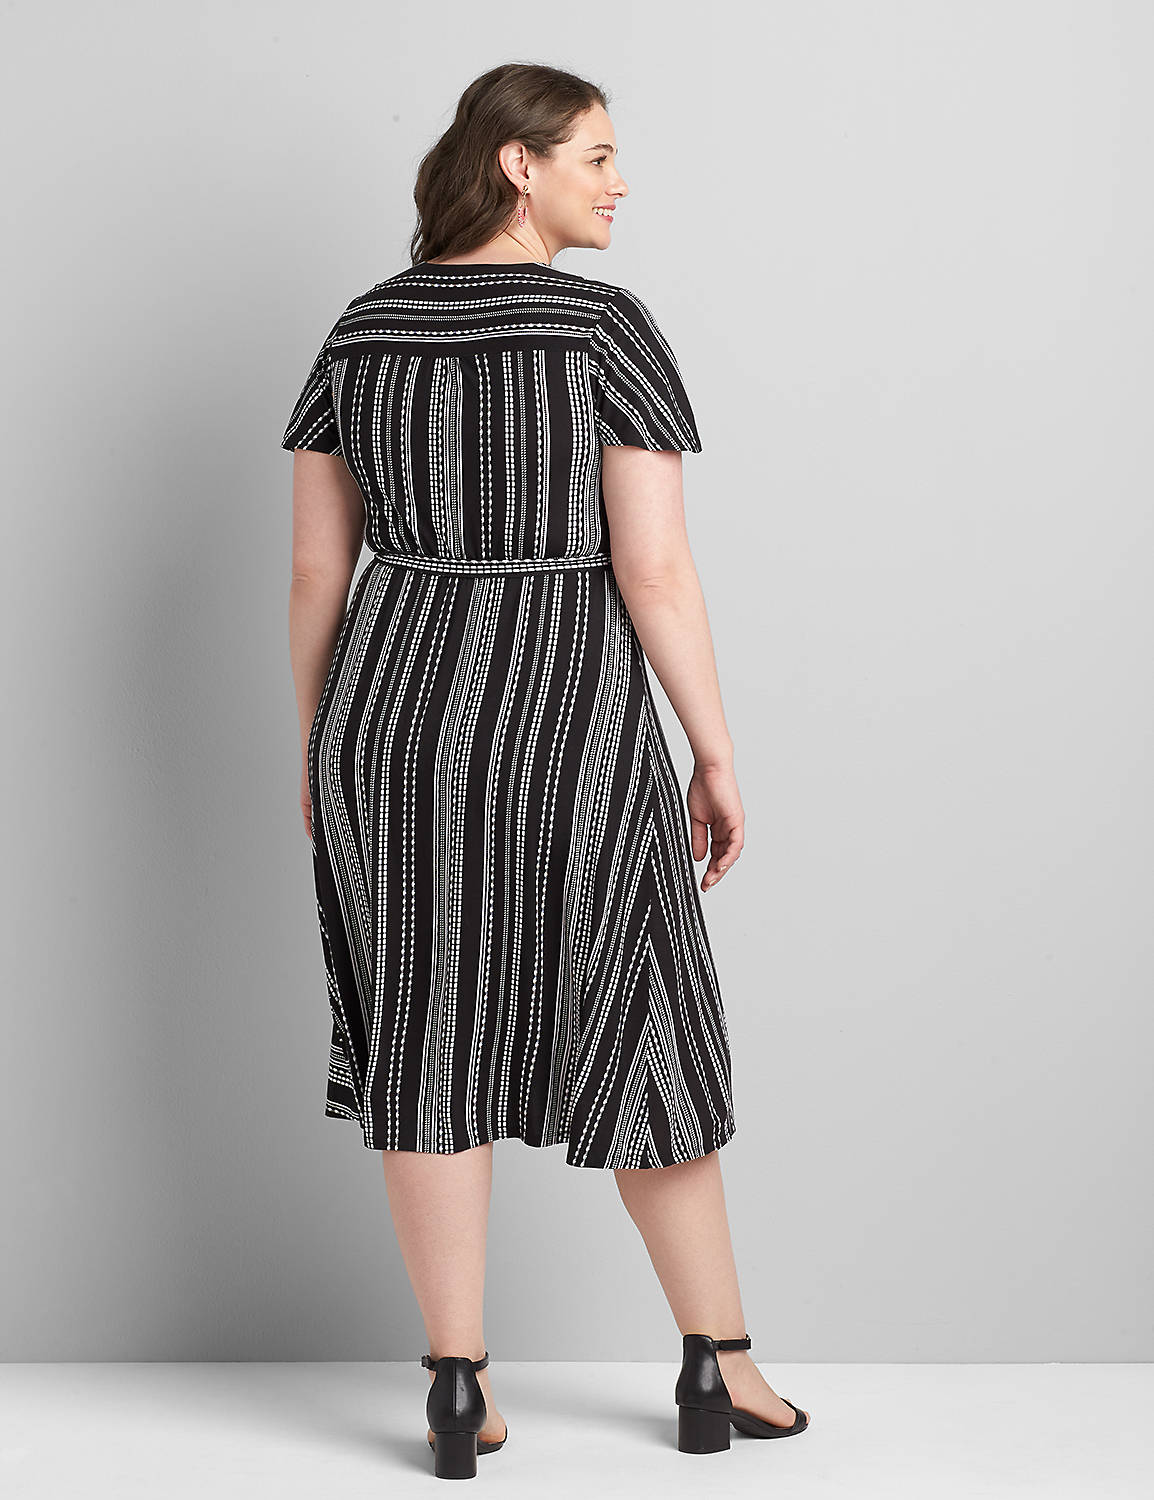 Crossover Striped Fit & Flare Dress Product Image 2